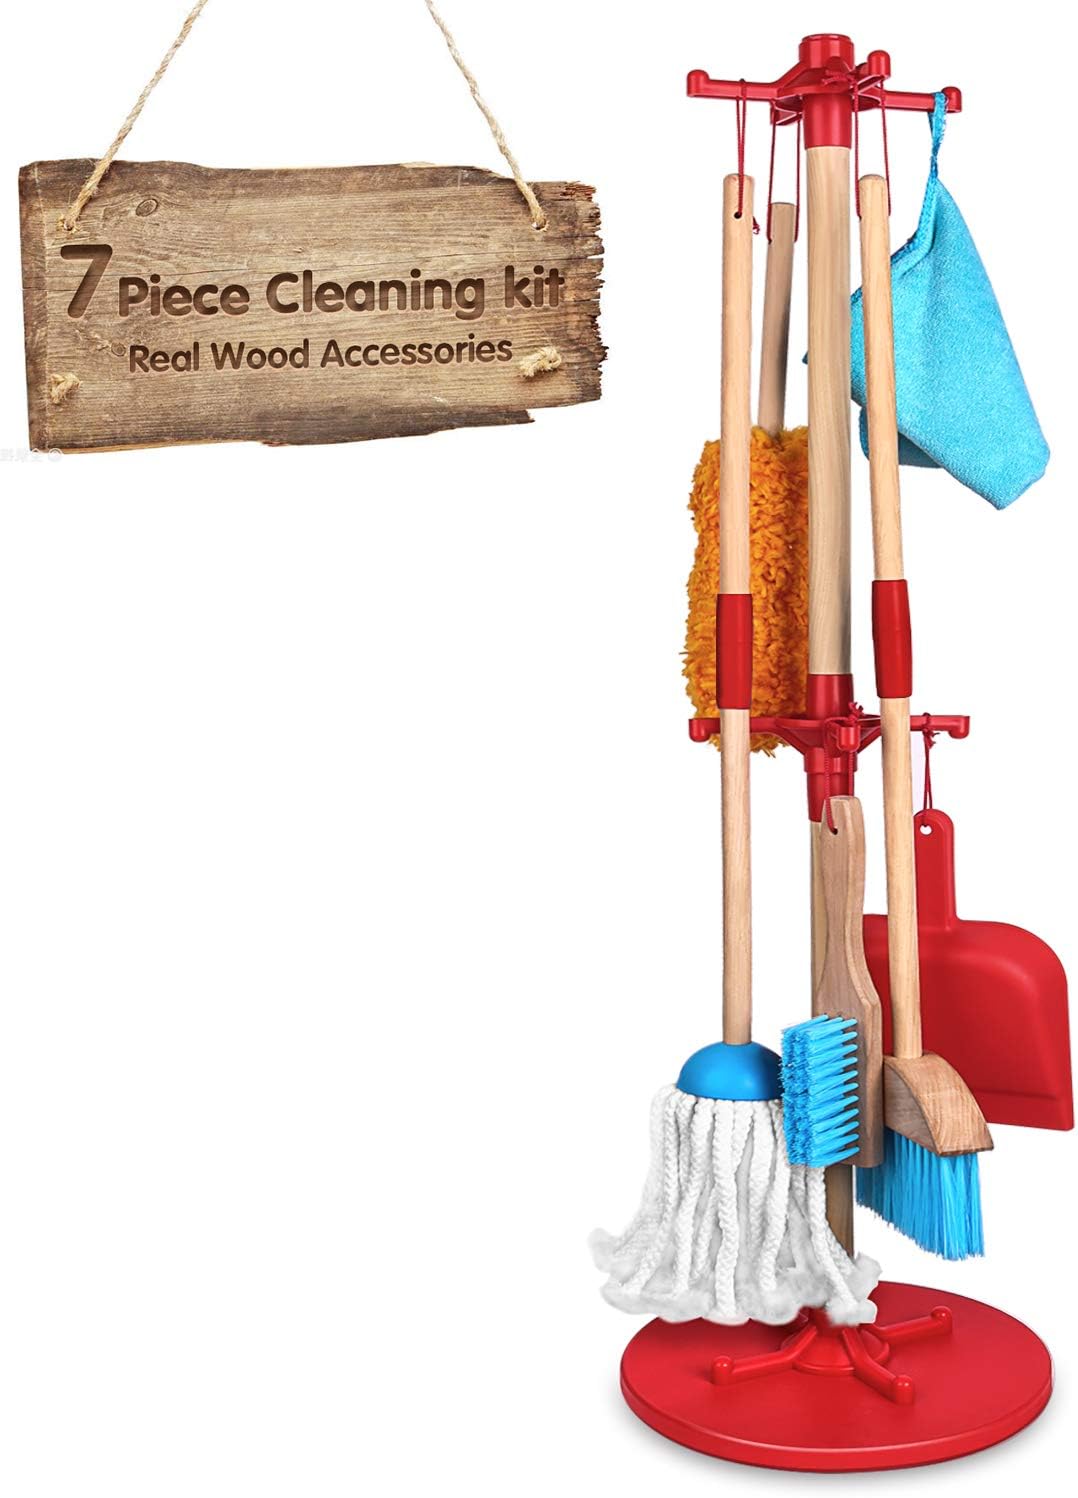 Kids Cleaning Set, 7Pcs Wooden Detachable Cleaning Tool -Includes Broom, Mop, Duster, Dustpan, Brush, Rag and Hanging Stand ,Really Children Cleaning Toys, Housekeeping Toys Gift for Girls & Boys